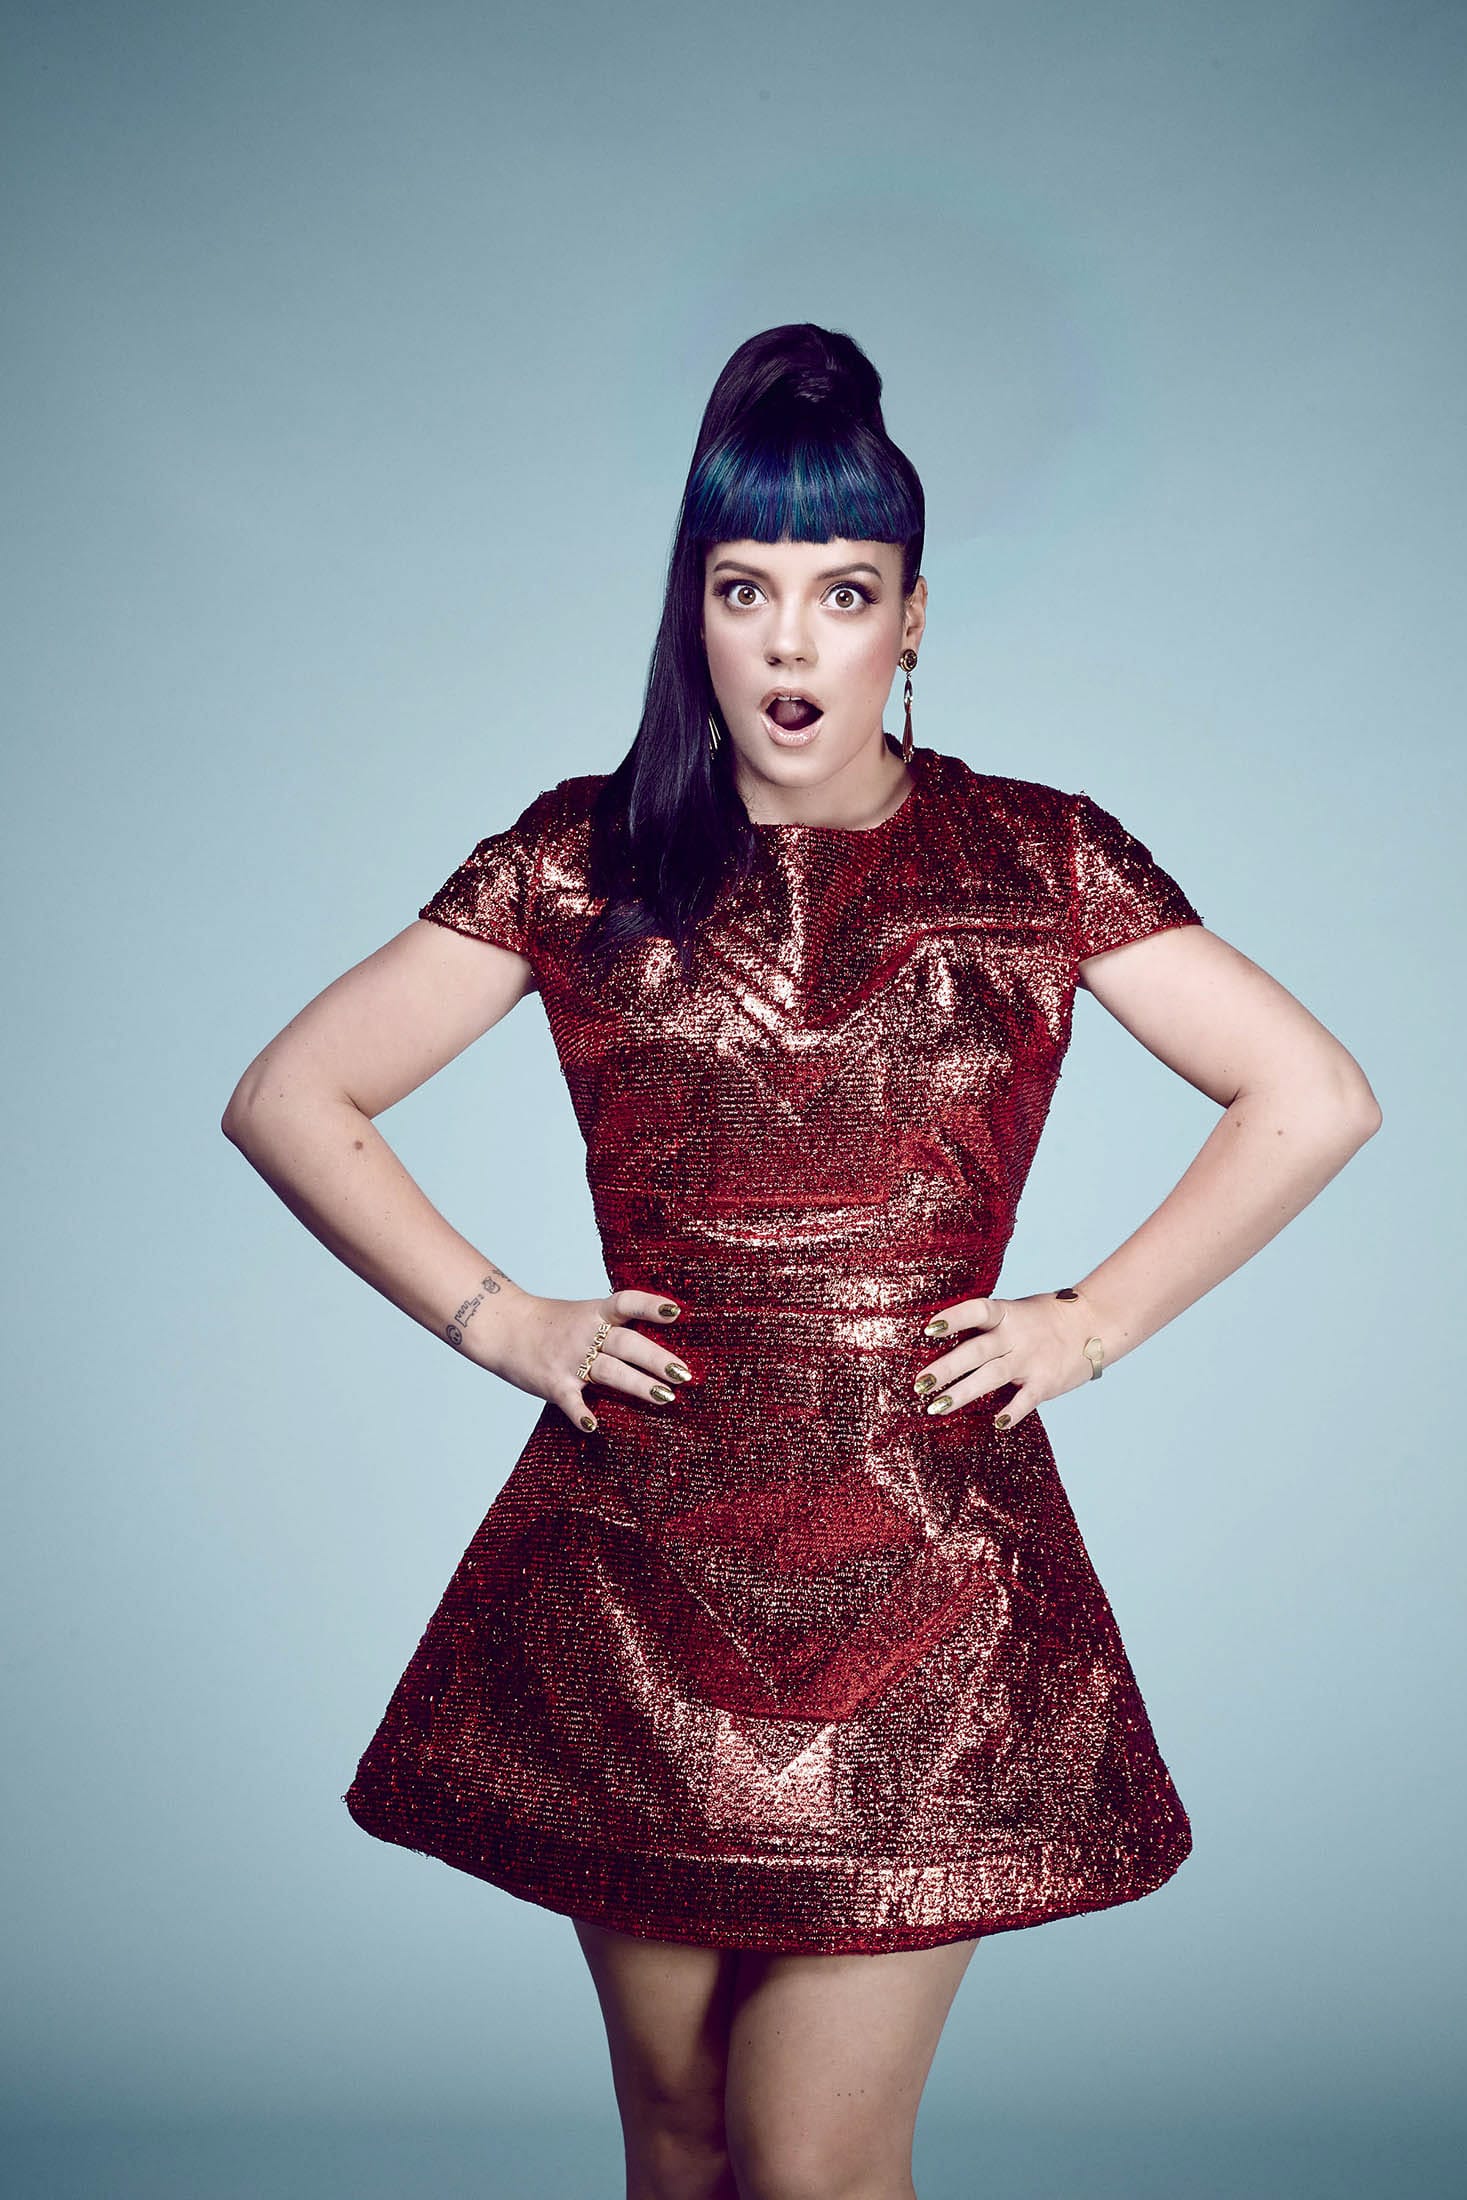 Jamie Nelson
British pop singer Lily Allen's first album in five years, &quot;Sheezus,&quot; takes a few jabs at other artists. She says some people just don't get it.